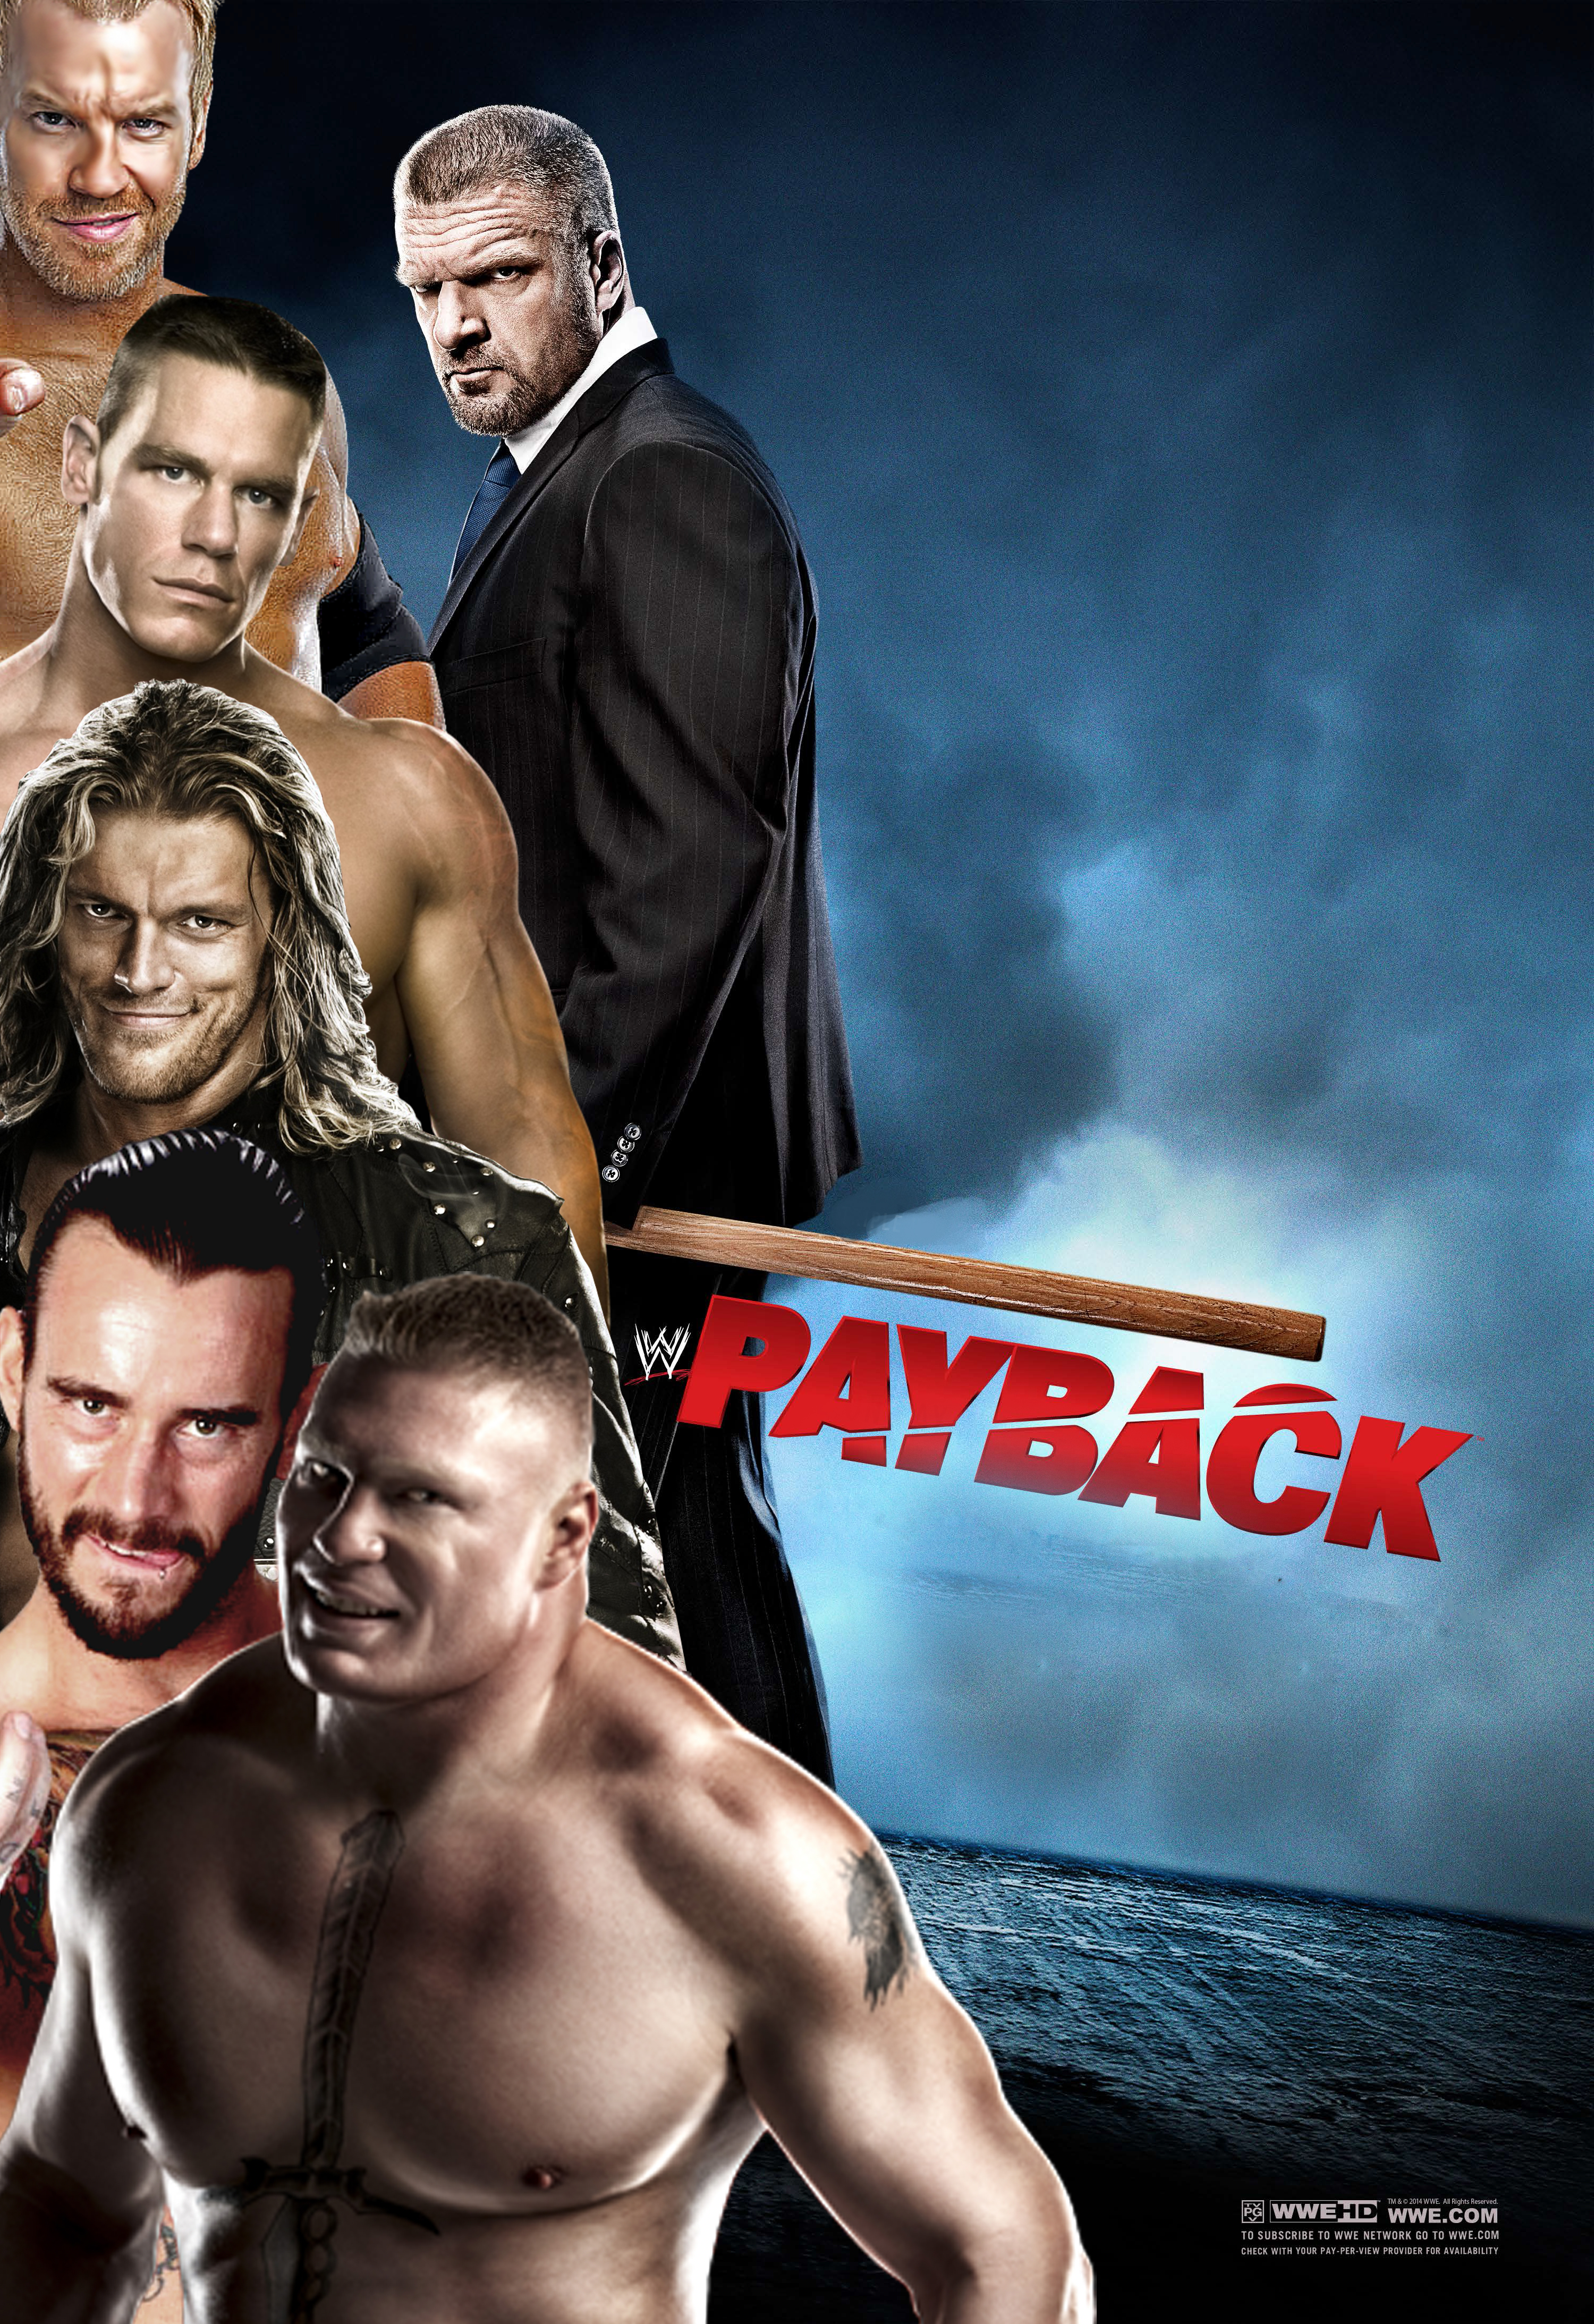 http://s6.picofile.com/file/8195156442/wwe_payback_2014_poster_official_by_dinesh_musiclover_d7h72vn.jpg